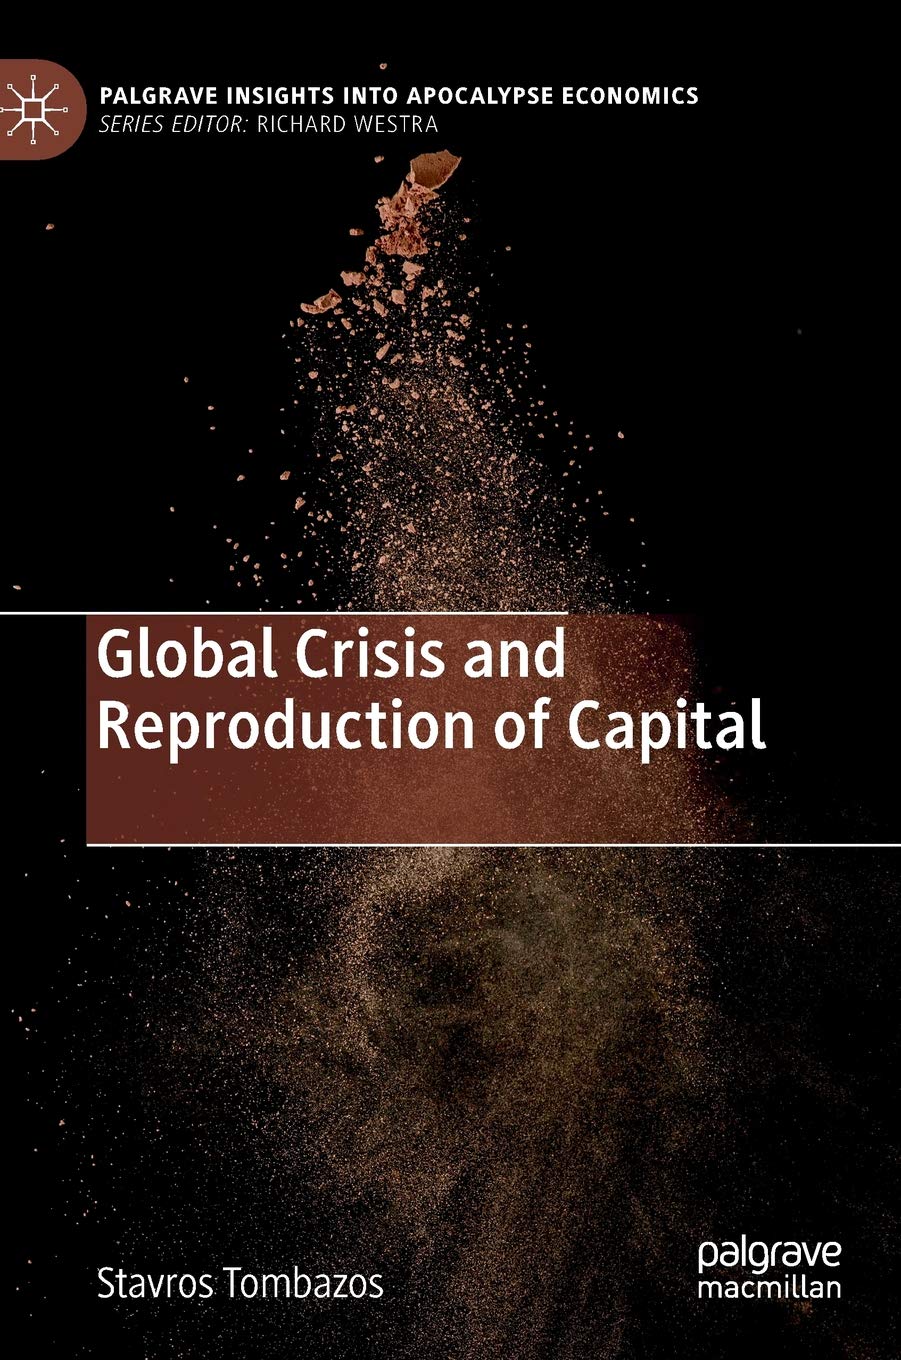 Global Crisis and the Reproduction of Capital' by Stavros Tombazos ...